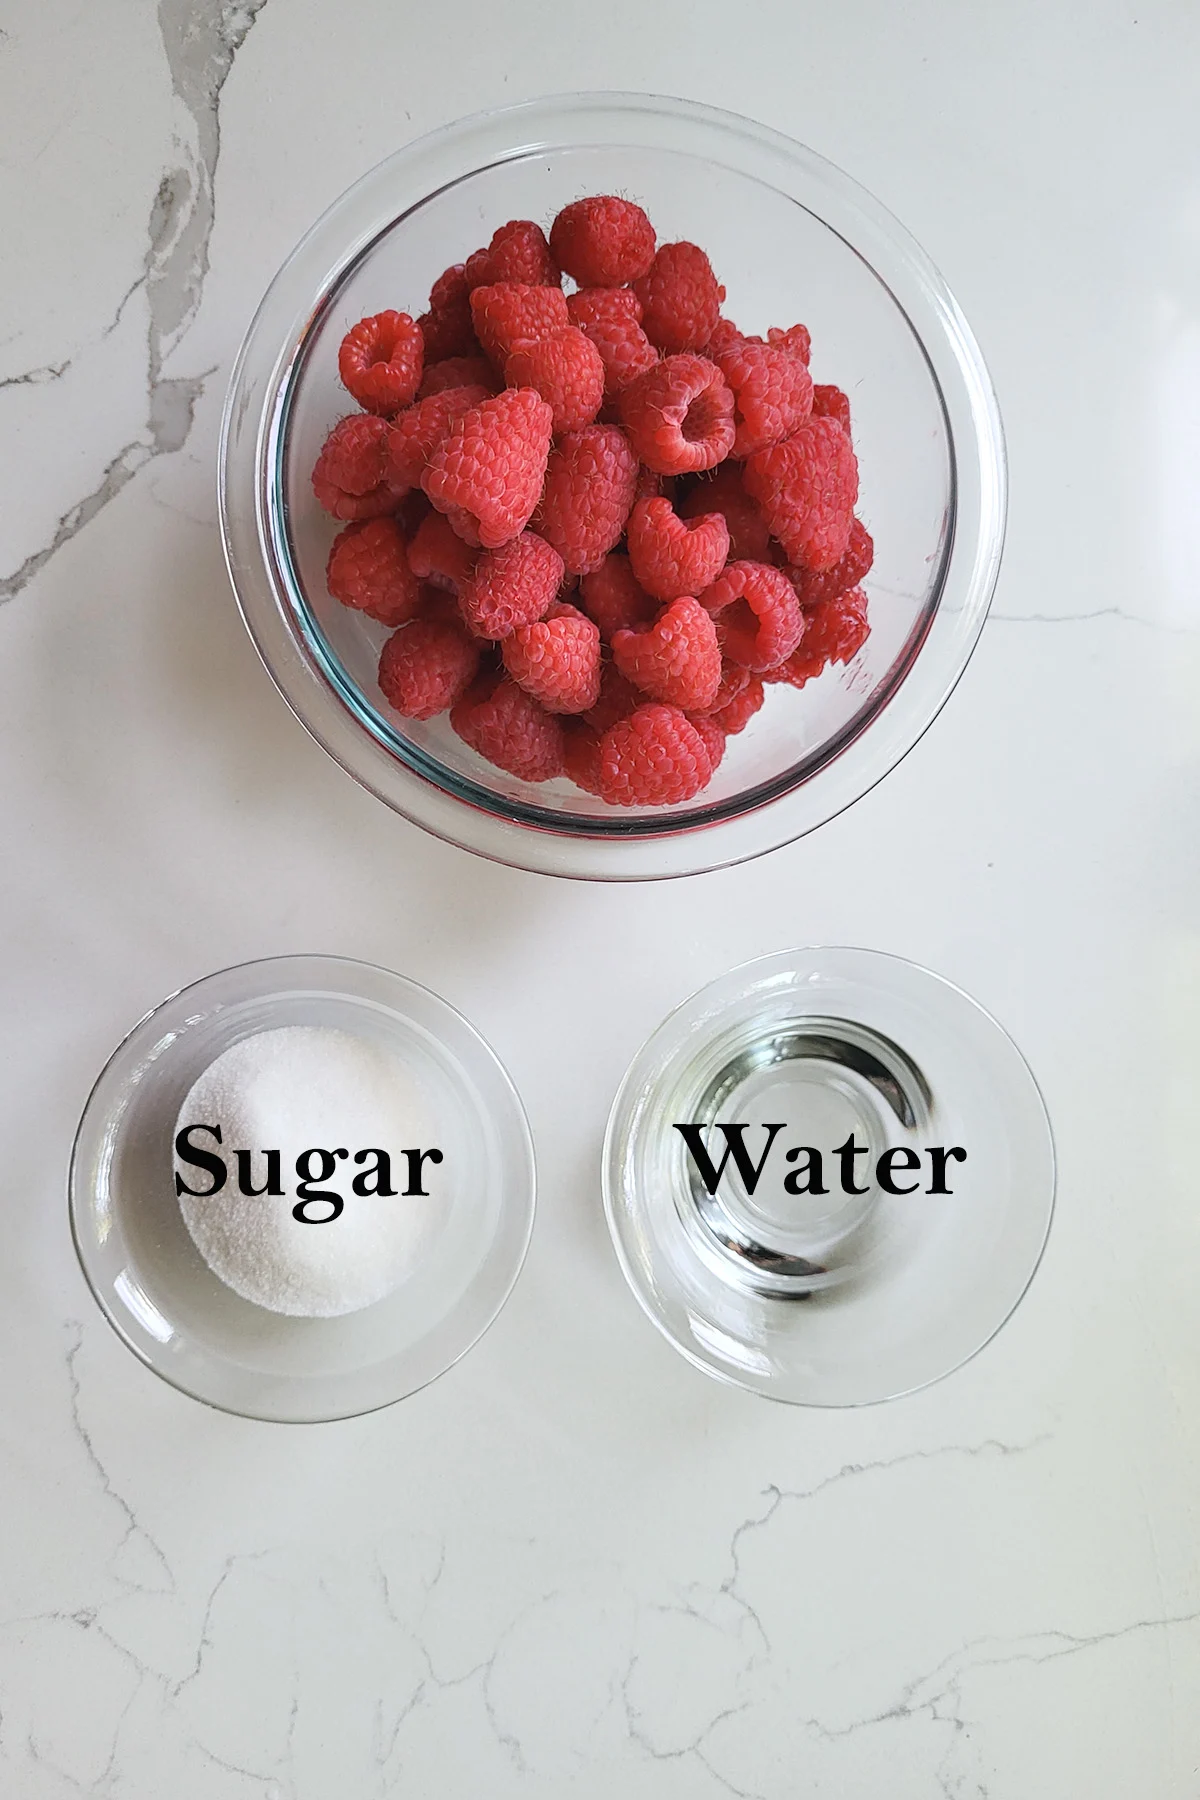 ingredients for raspberry compote in glass bowls on a white surface.